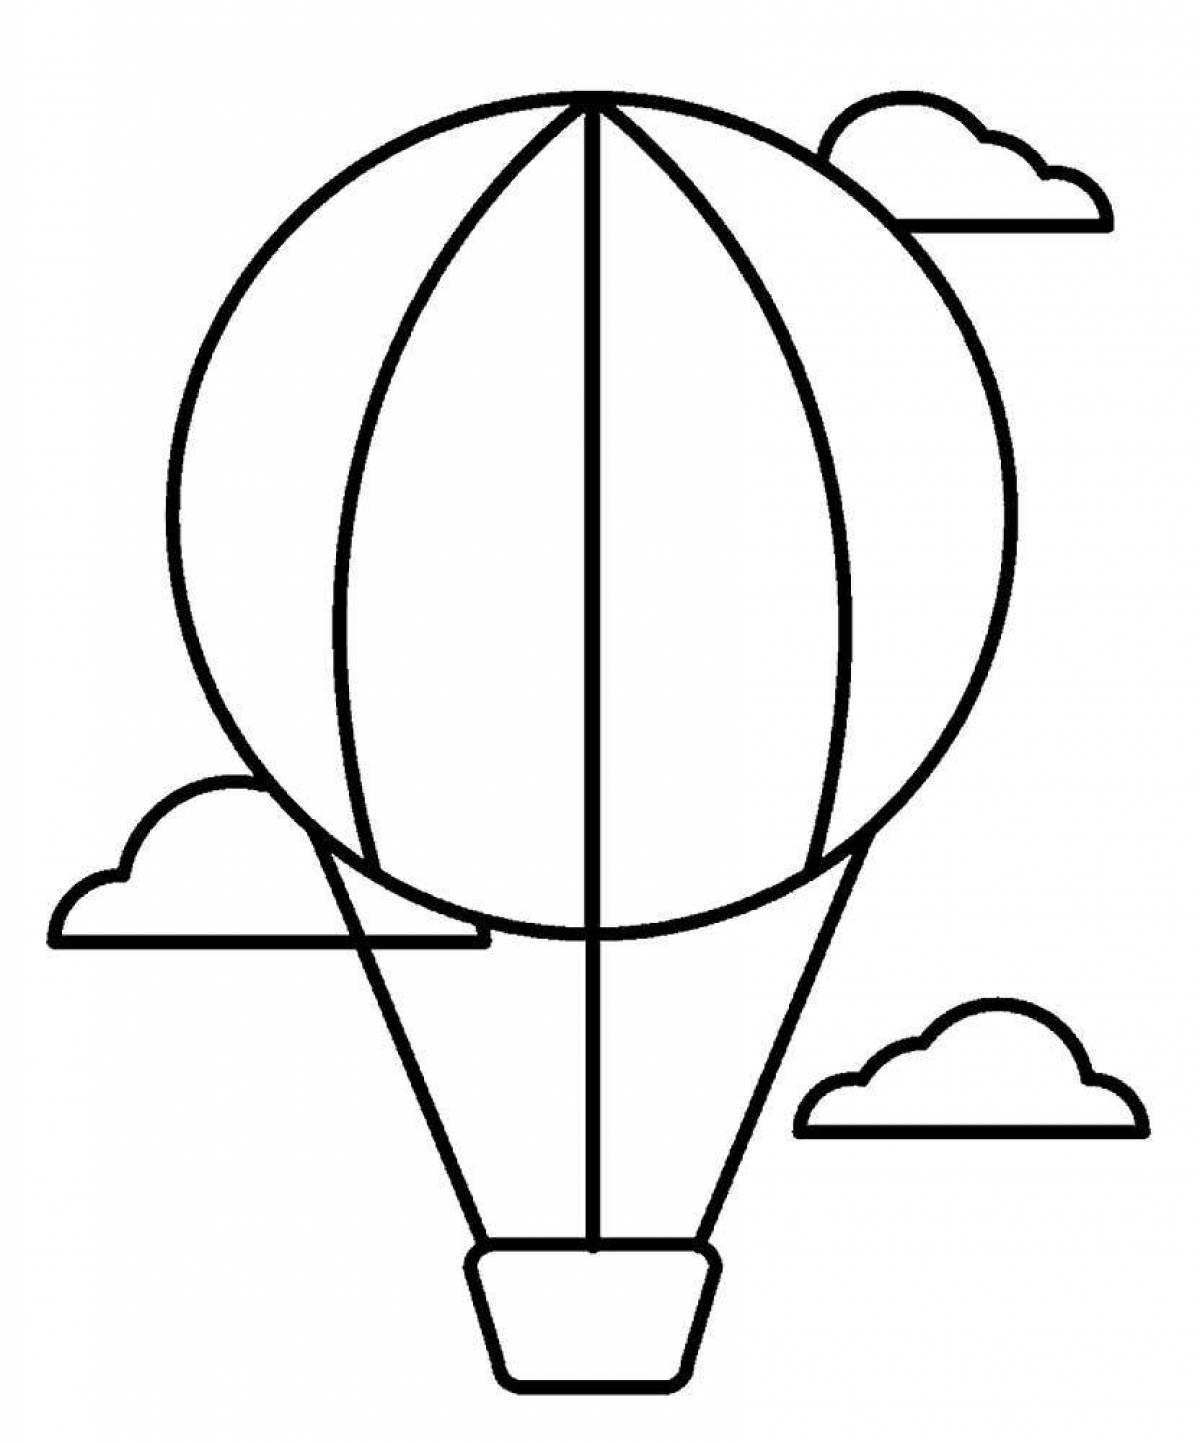 Coloring book with balloons for kids